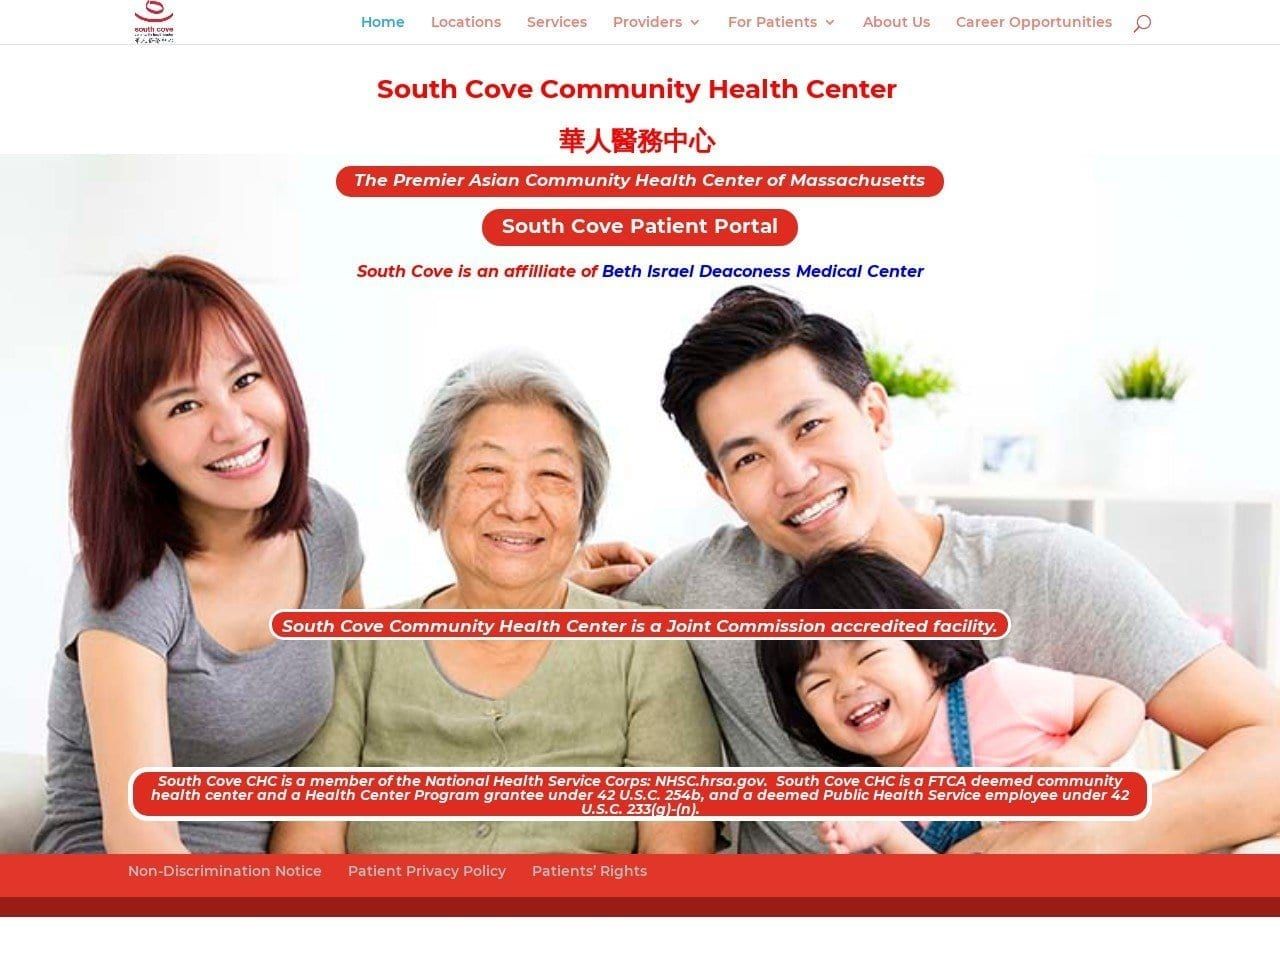 South Cove Community Health Website Screenshot from scchc.org